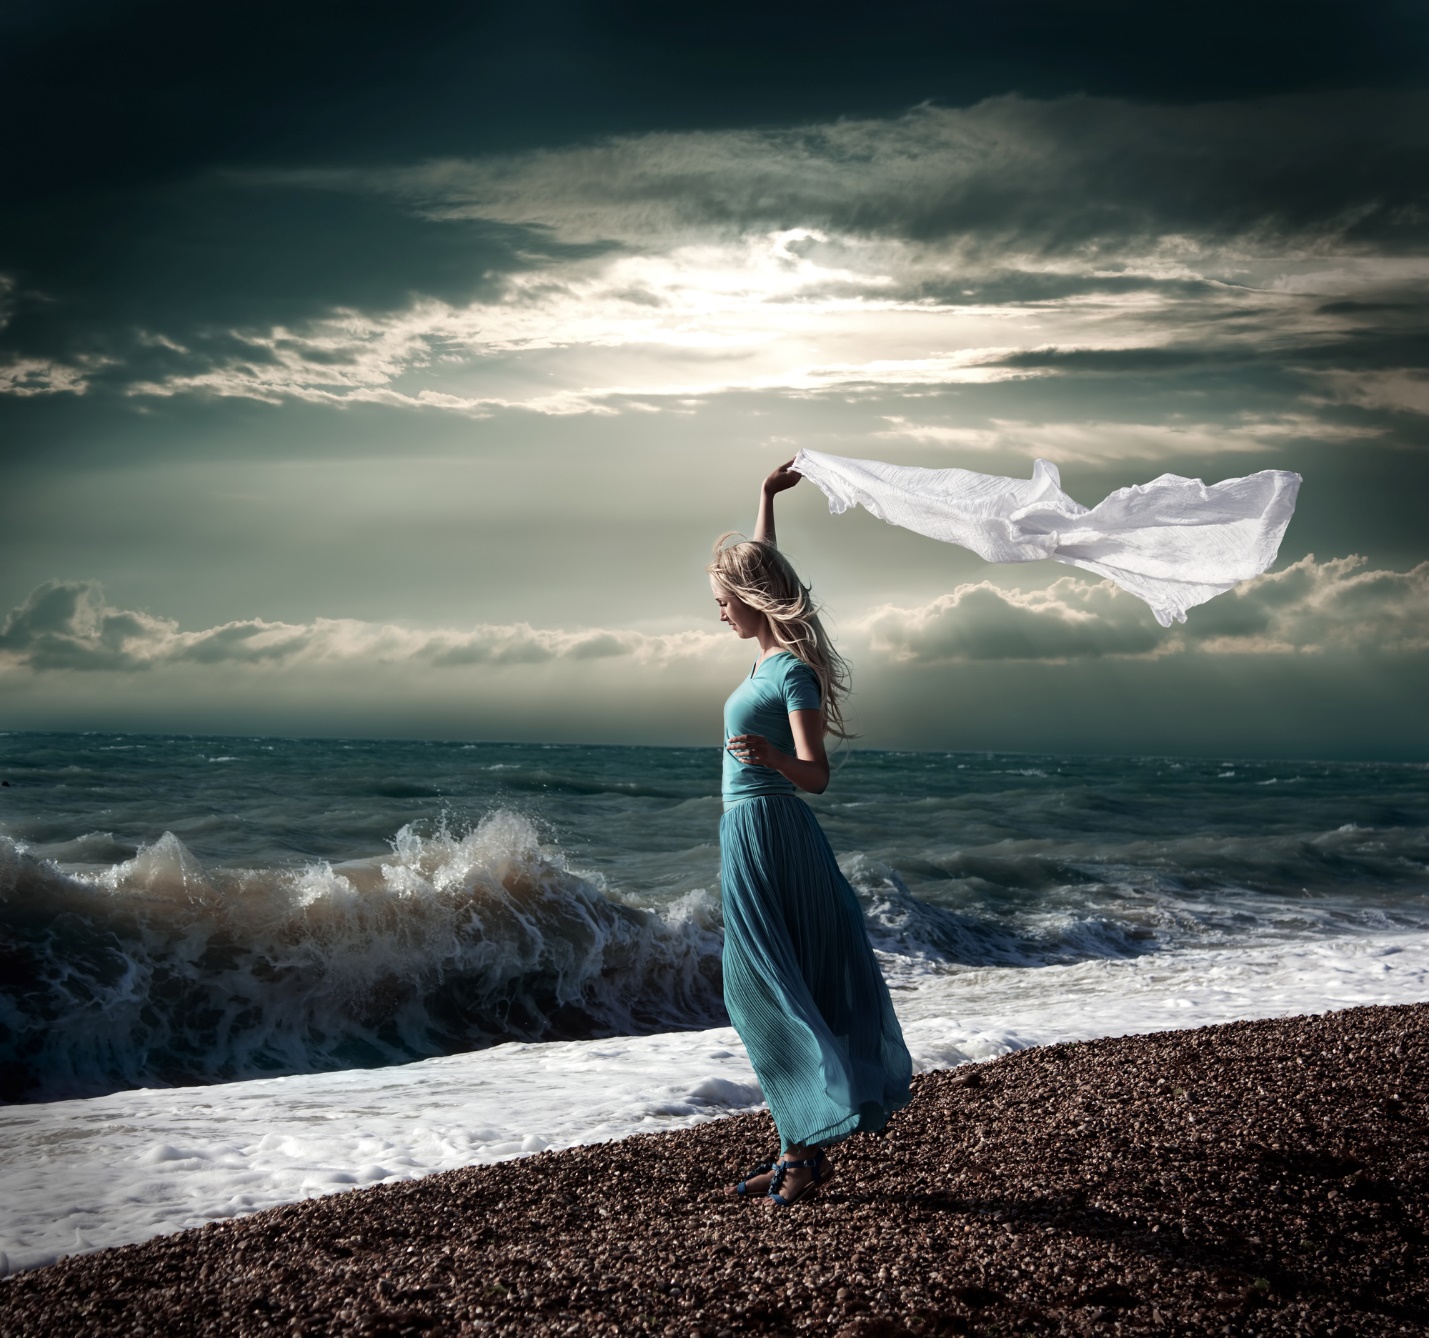 A person in a blue dress on a beach with waves and a white scarf

Description automatically generated